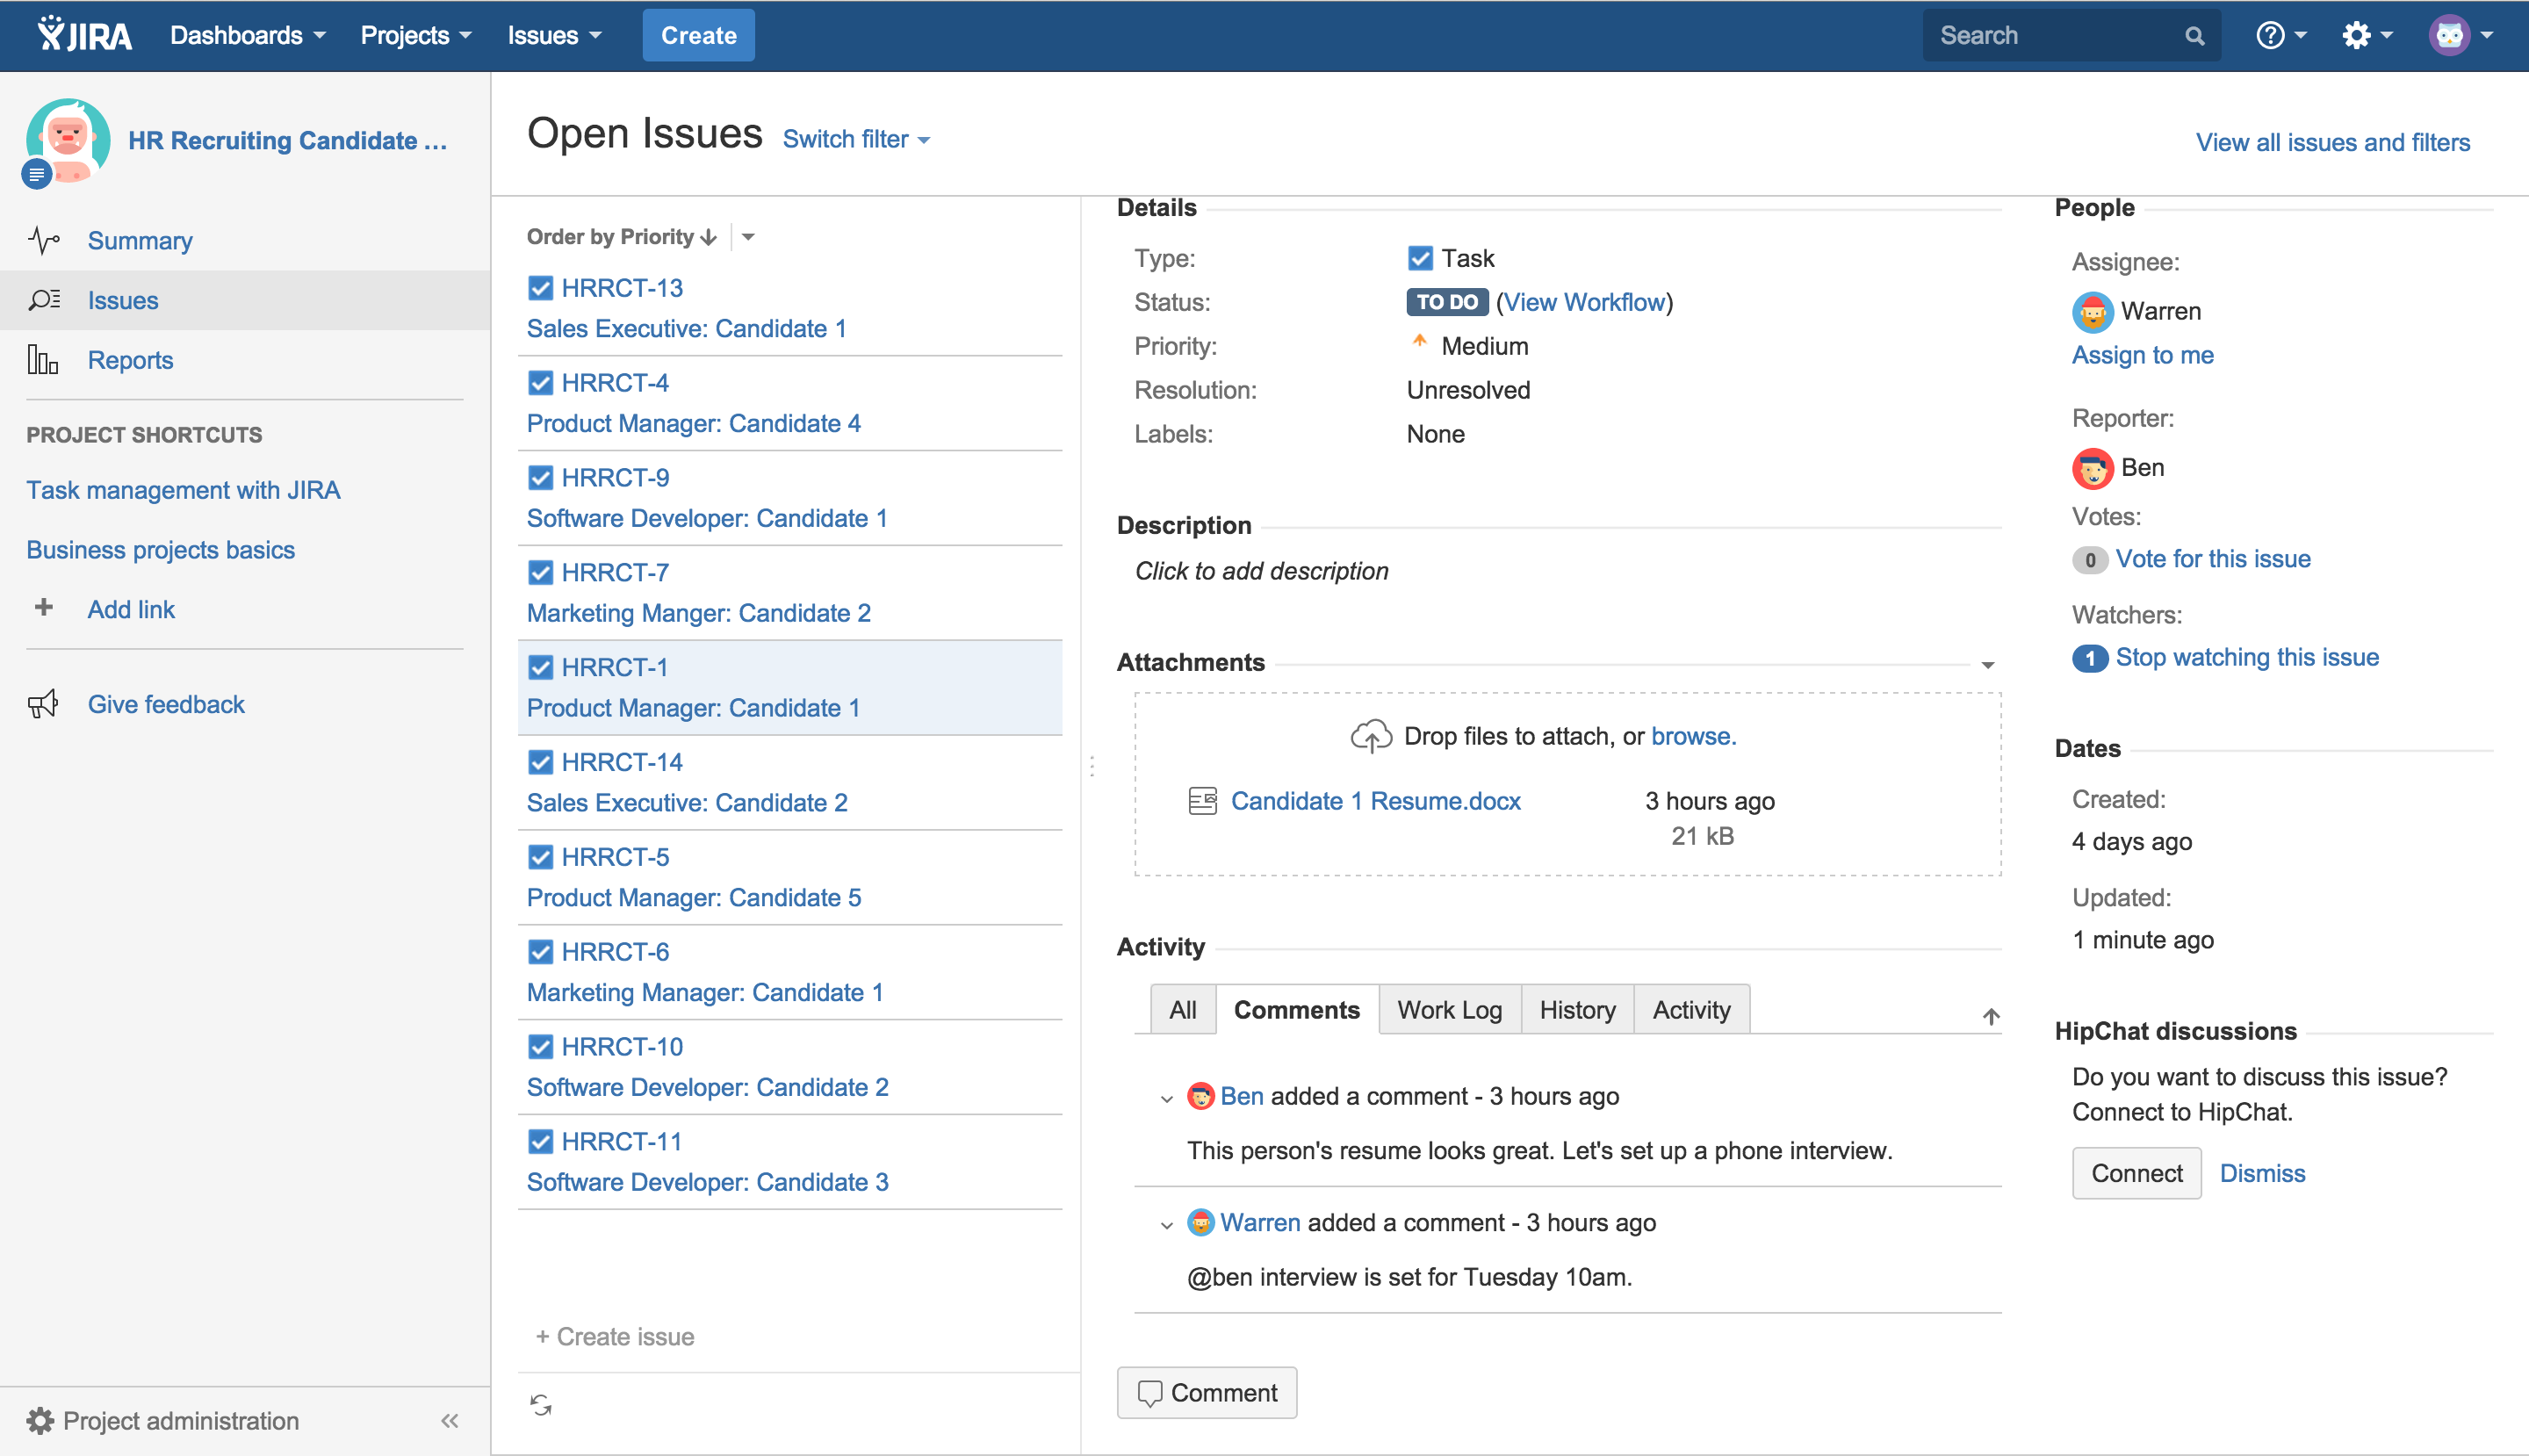 jira client based view